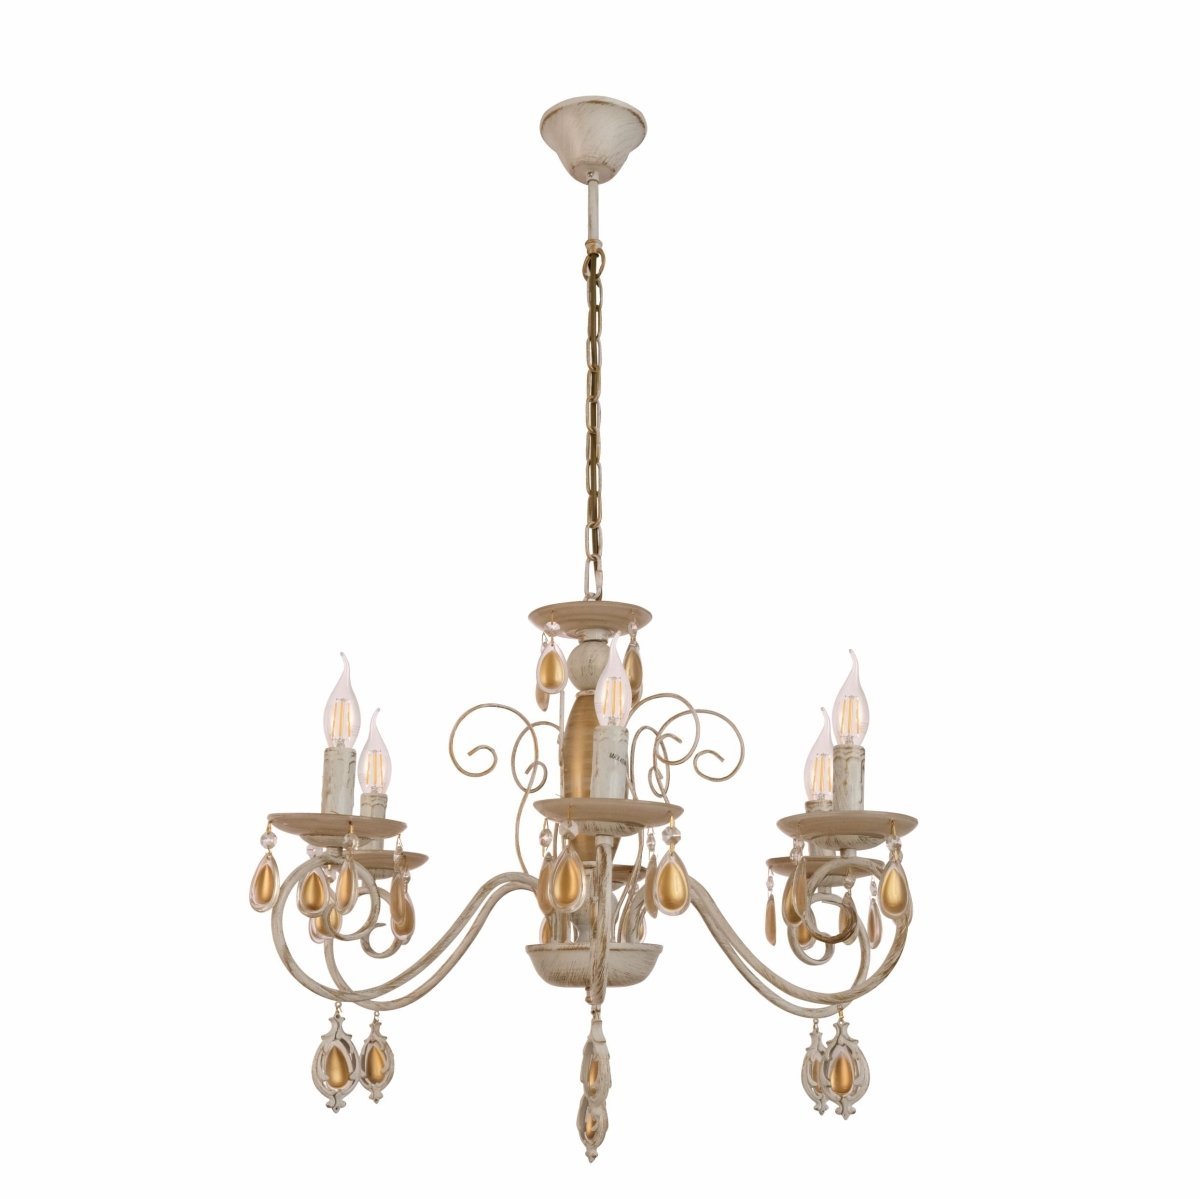 Main image of Amber Crystal Gold and White Metal 6 Arm Chandelier with E14 Fitting | TEKLED 158-19443